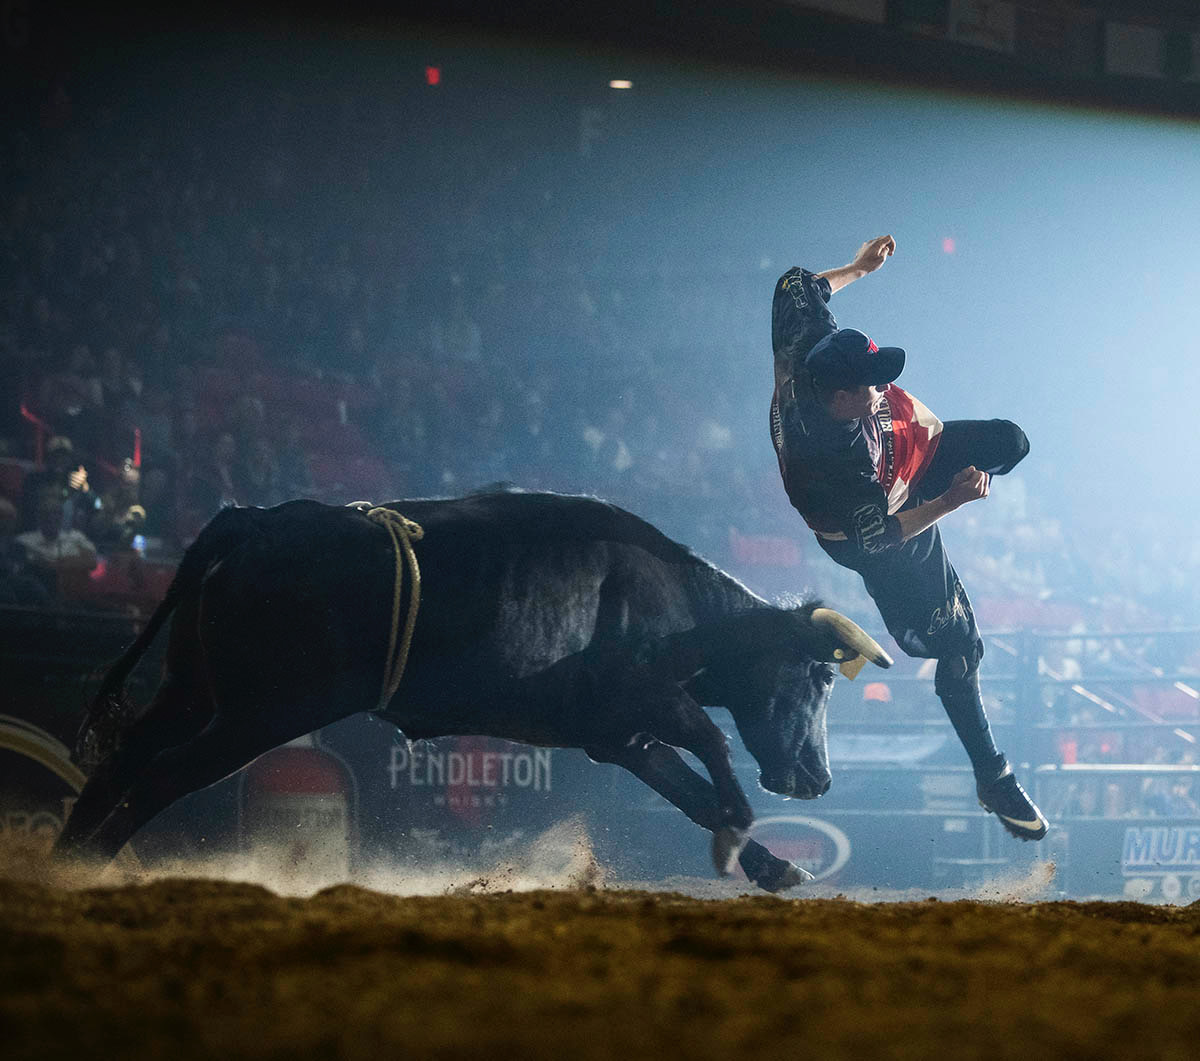 Aaron Mercer of Calgary, Alberta, competes at the Alpha Bull-Bullfighters Only event in Moose Jaw, Saskatchewan, earlier this month. His win there pushed him to No. 1 in the BFO Pendleton Whisky World Standings and stands as proof of the excellent freestyle bullfighting that has been established by BFO Canada. (PHOTO BY TODD KOROL)